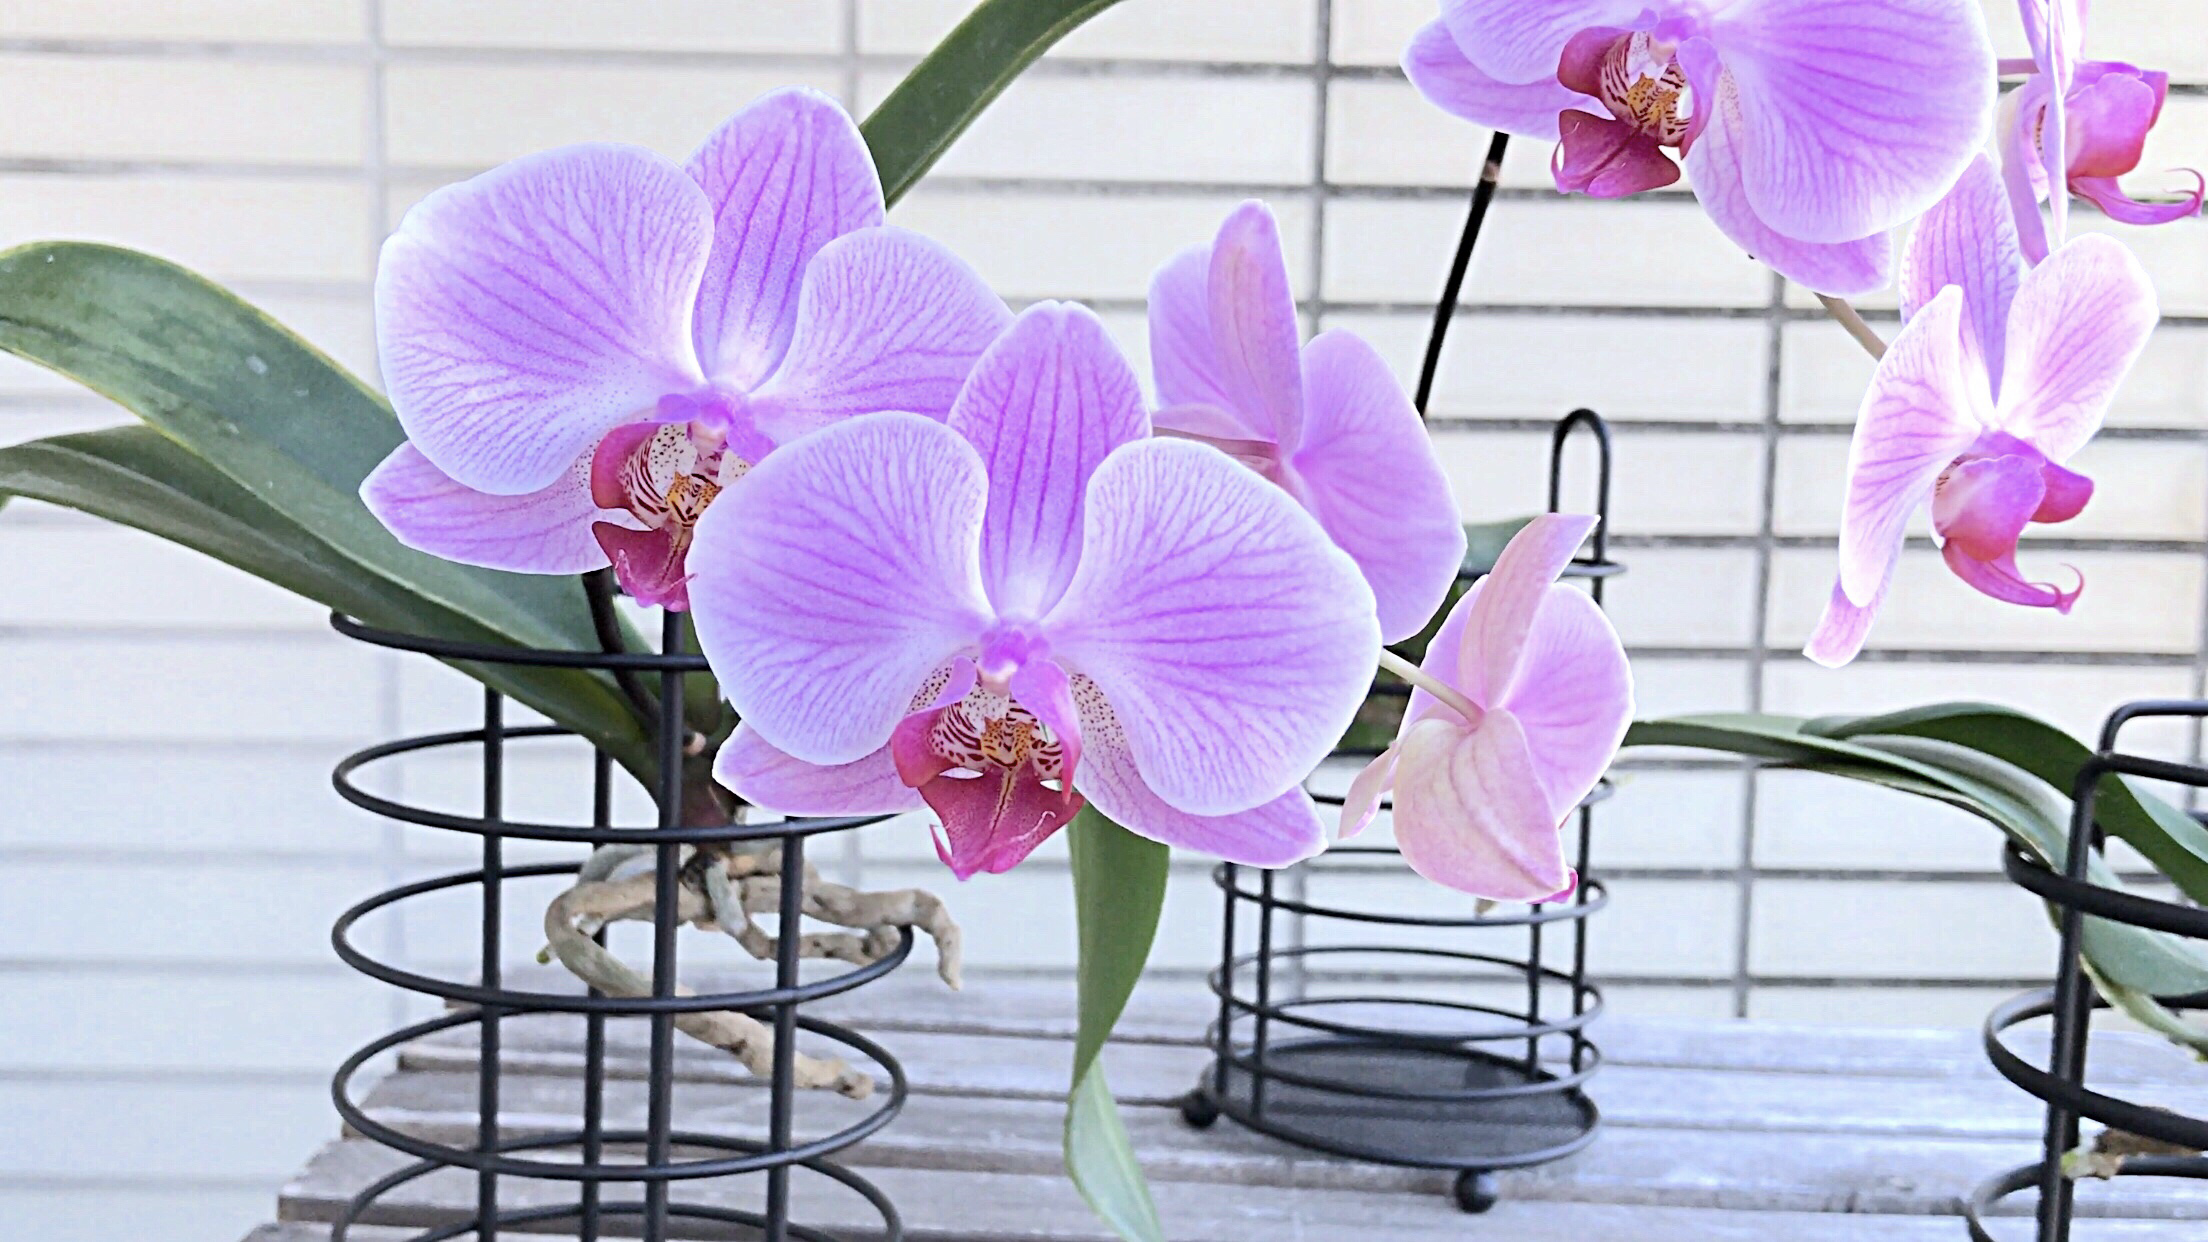 Orchid care, orchid new spike care, how to look after orchids, orchid care for beginners, orchid losing flowers, water culture orchids, hydroponic orchids, orchid cutting, double spike orchid, orchid growing roots in the air, unhealthy orchid roots, pruning orchids, do you trim orchid stems, when do orchids bloom indoors